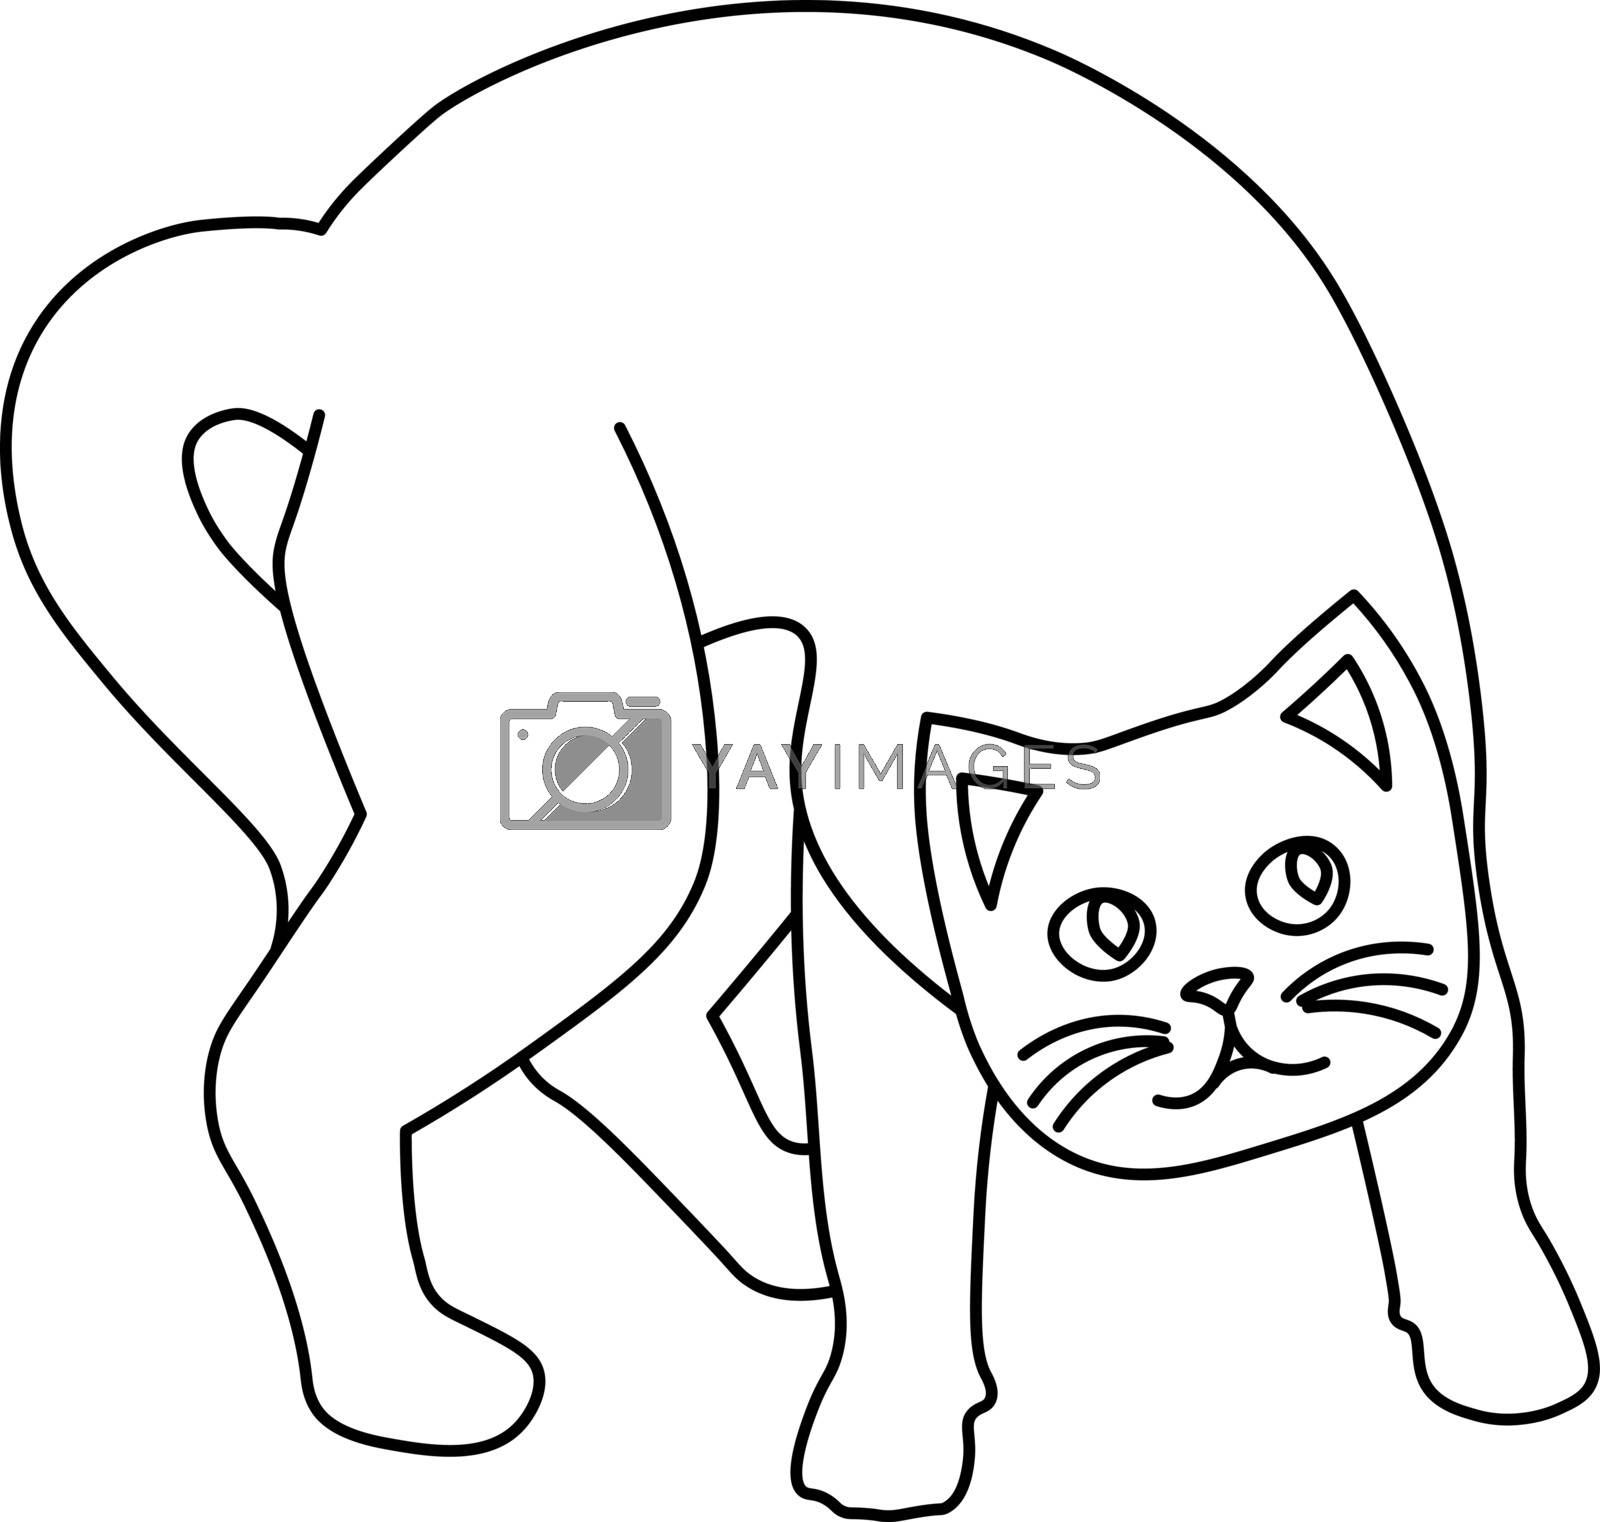 Royalty free image of Line art of weird curious cat by paranoido